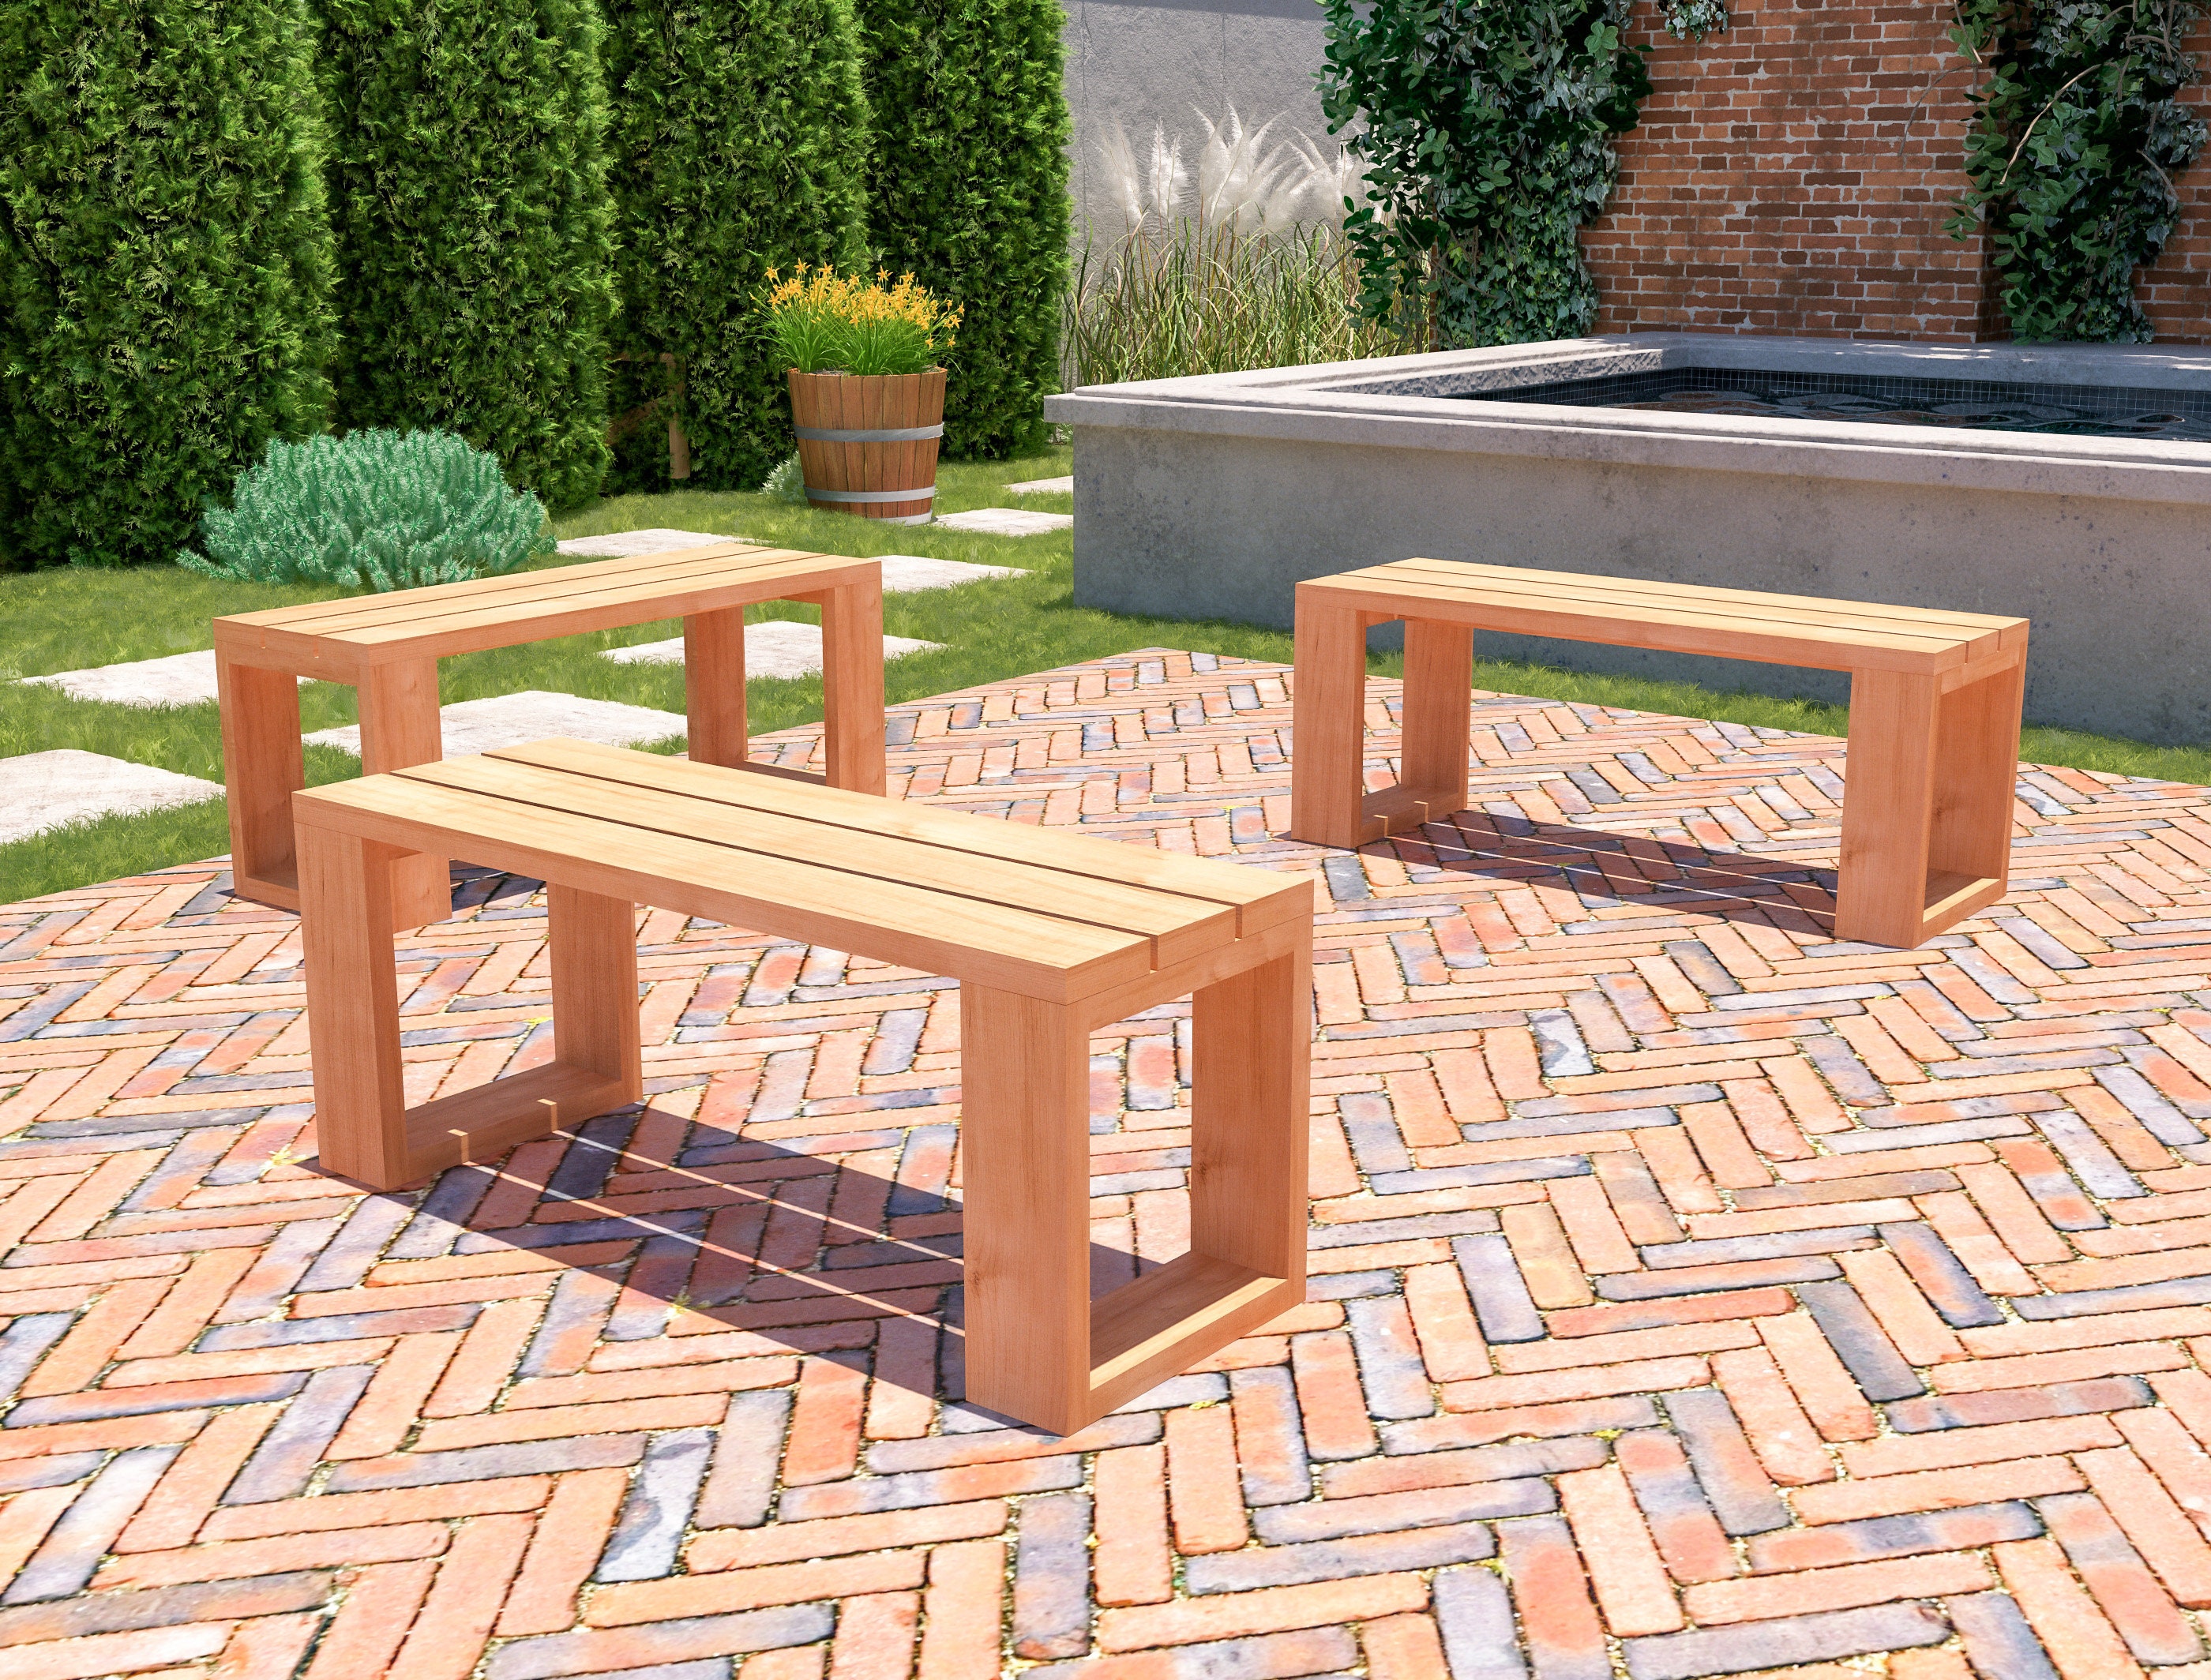 DIY 2x6 Outdoor Bench w/ Back Plans » Free Plans